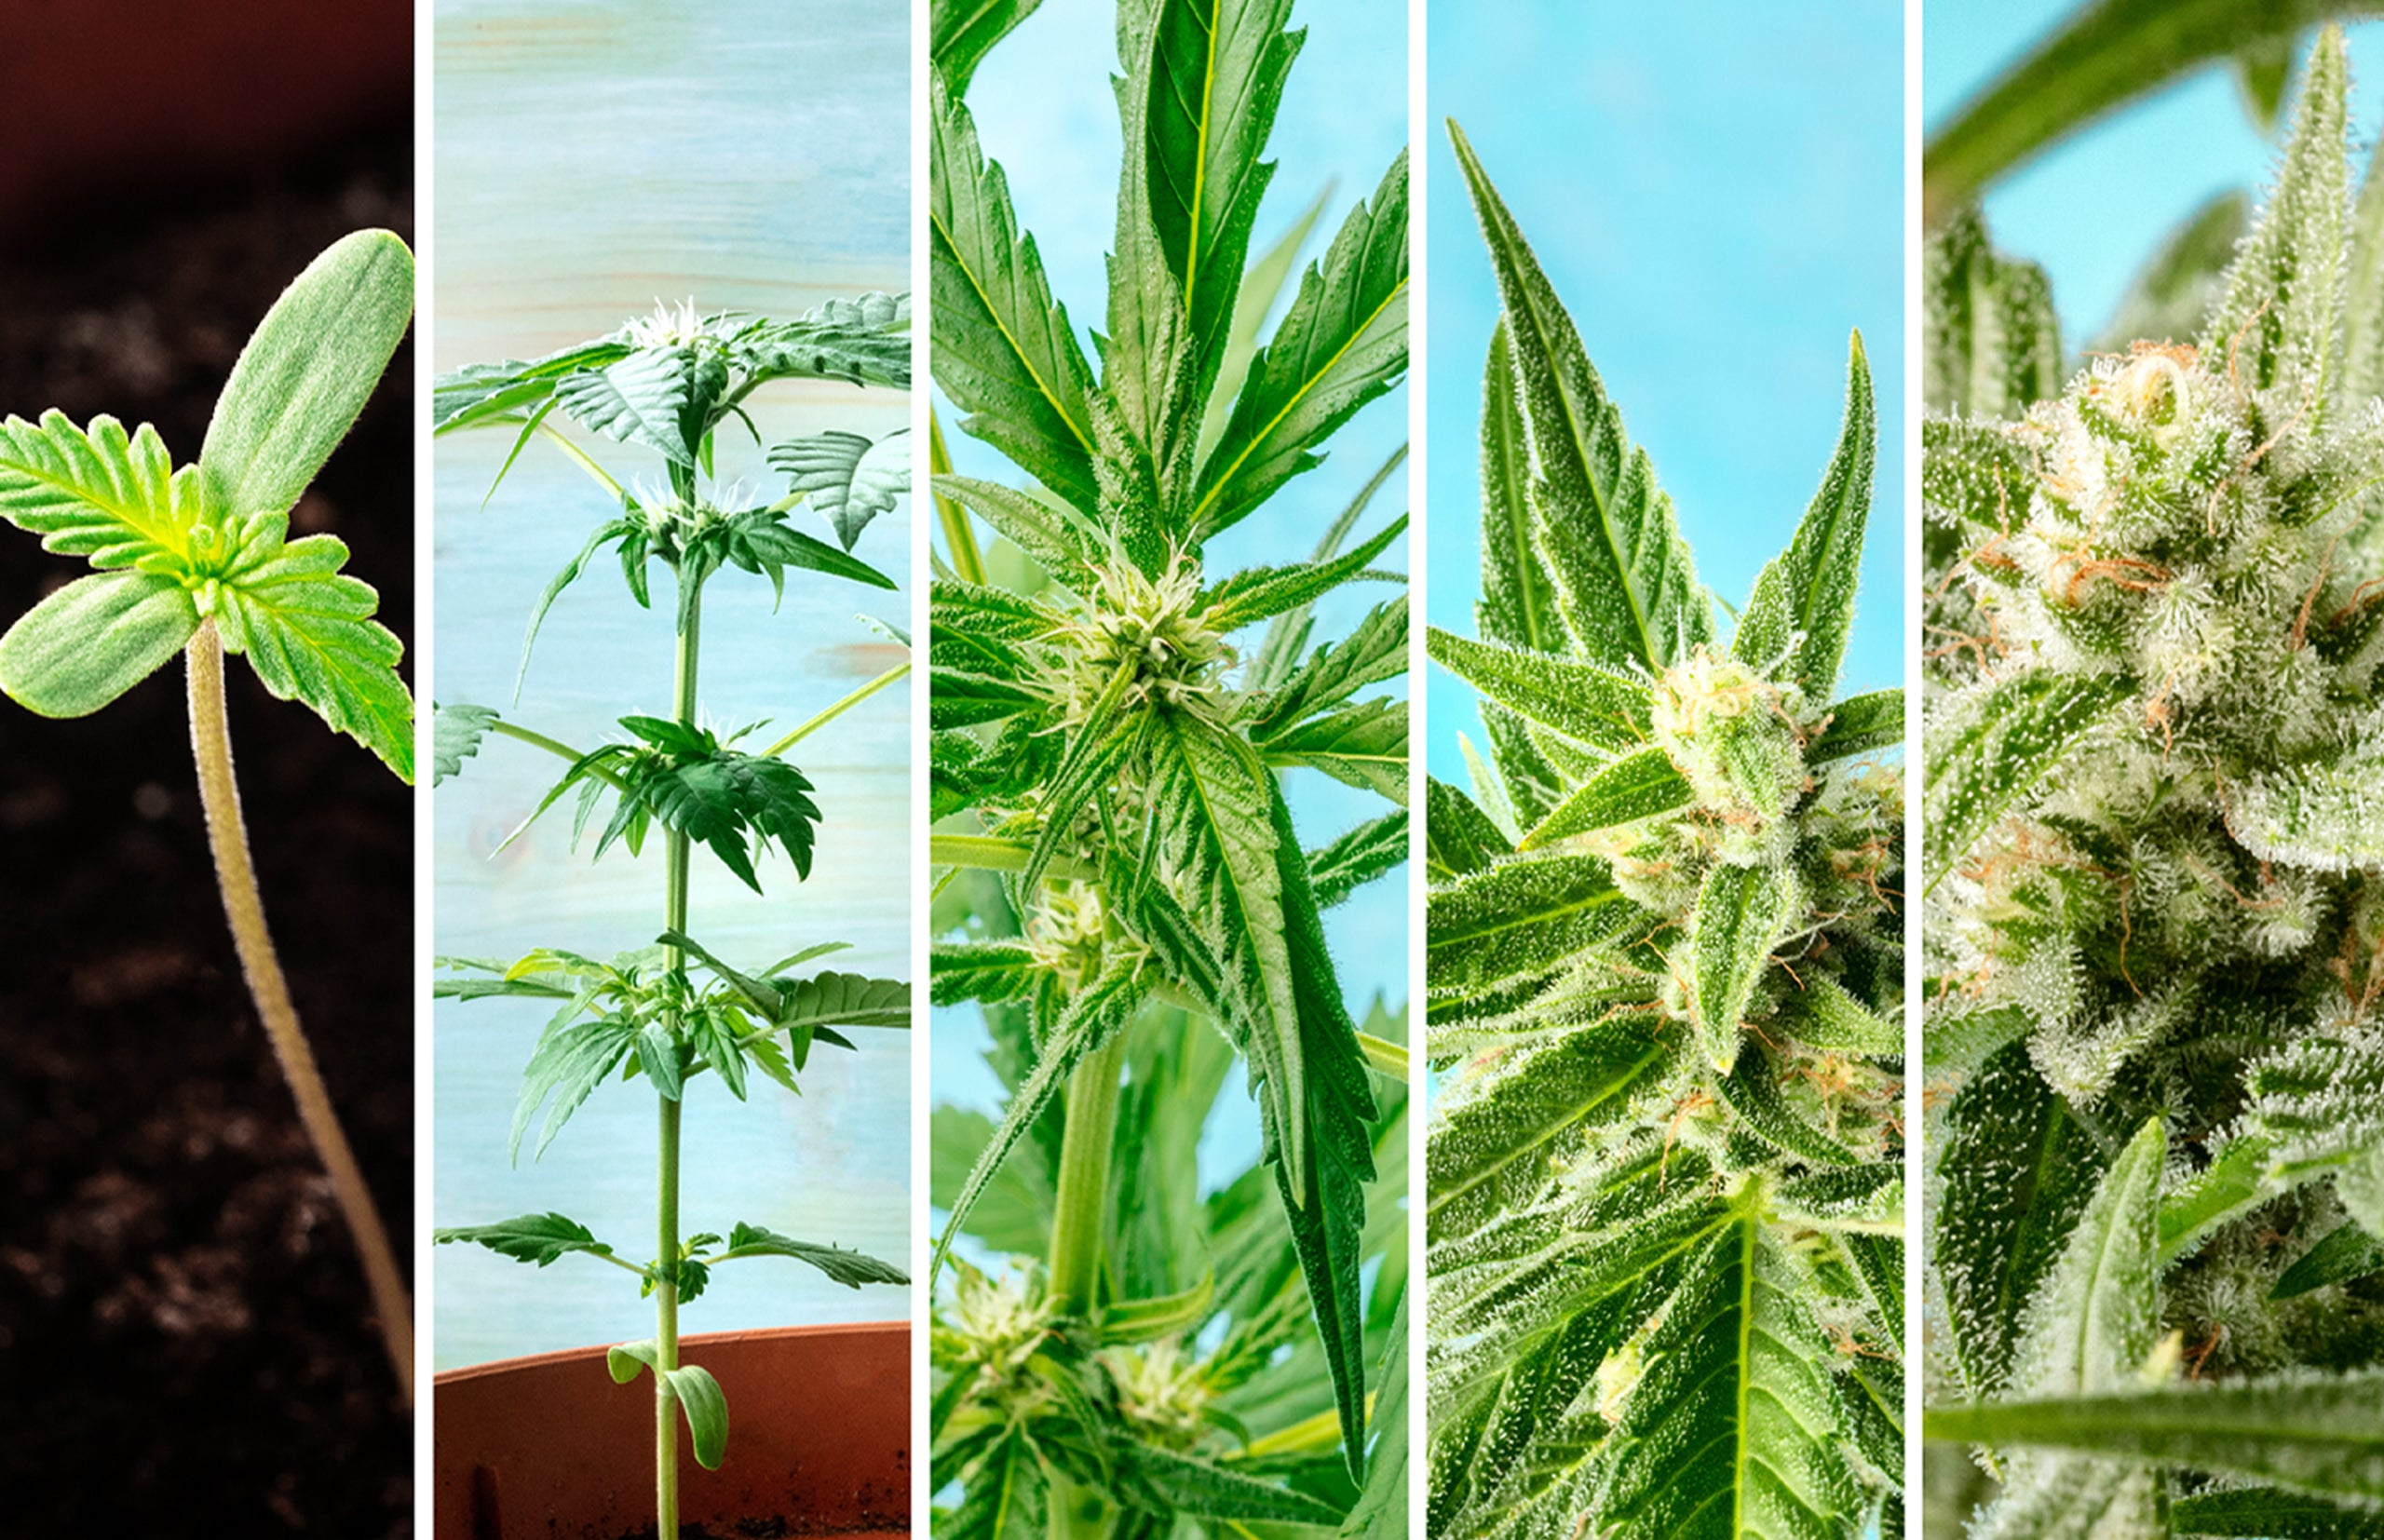 Growing Stages of the Cannabis Plant